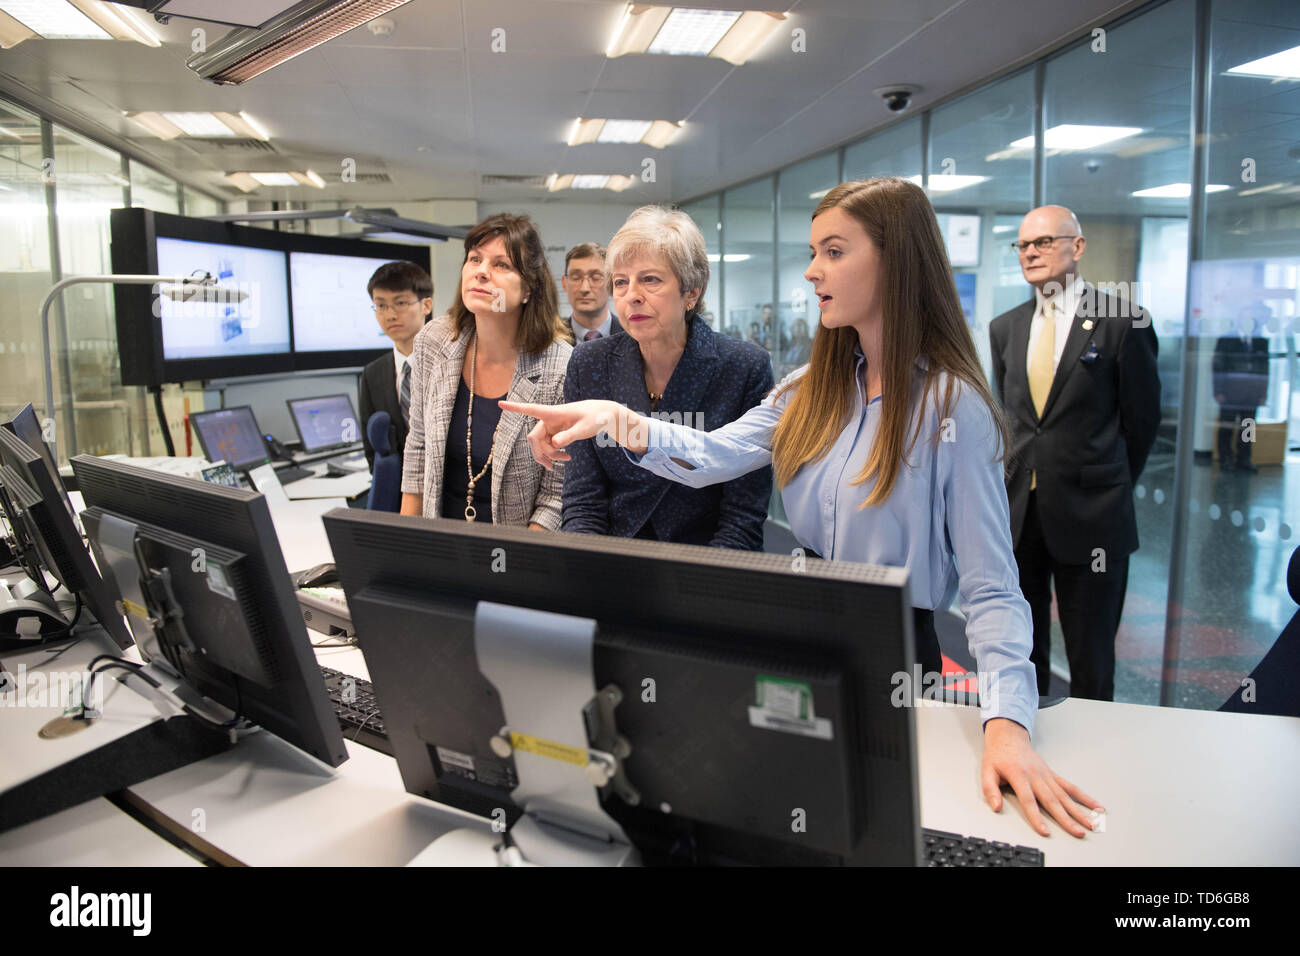 Prime Minister Theresa May during a visit to Imperial College in London where she saw machinery which converts carbon dioxide into oxygen after her announcement that the UK is to set a legally binding target to end its contribution to climate change by 2050. Stock Photo